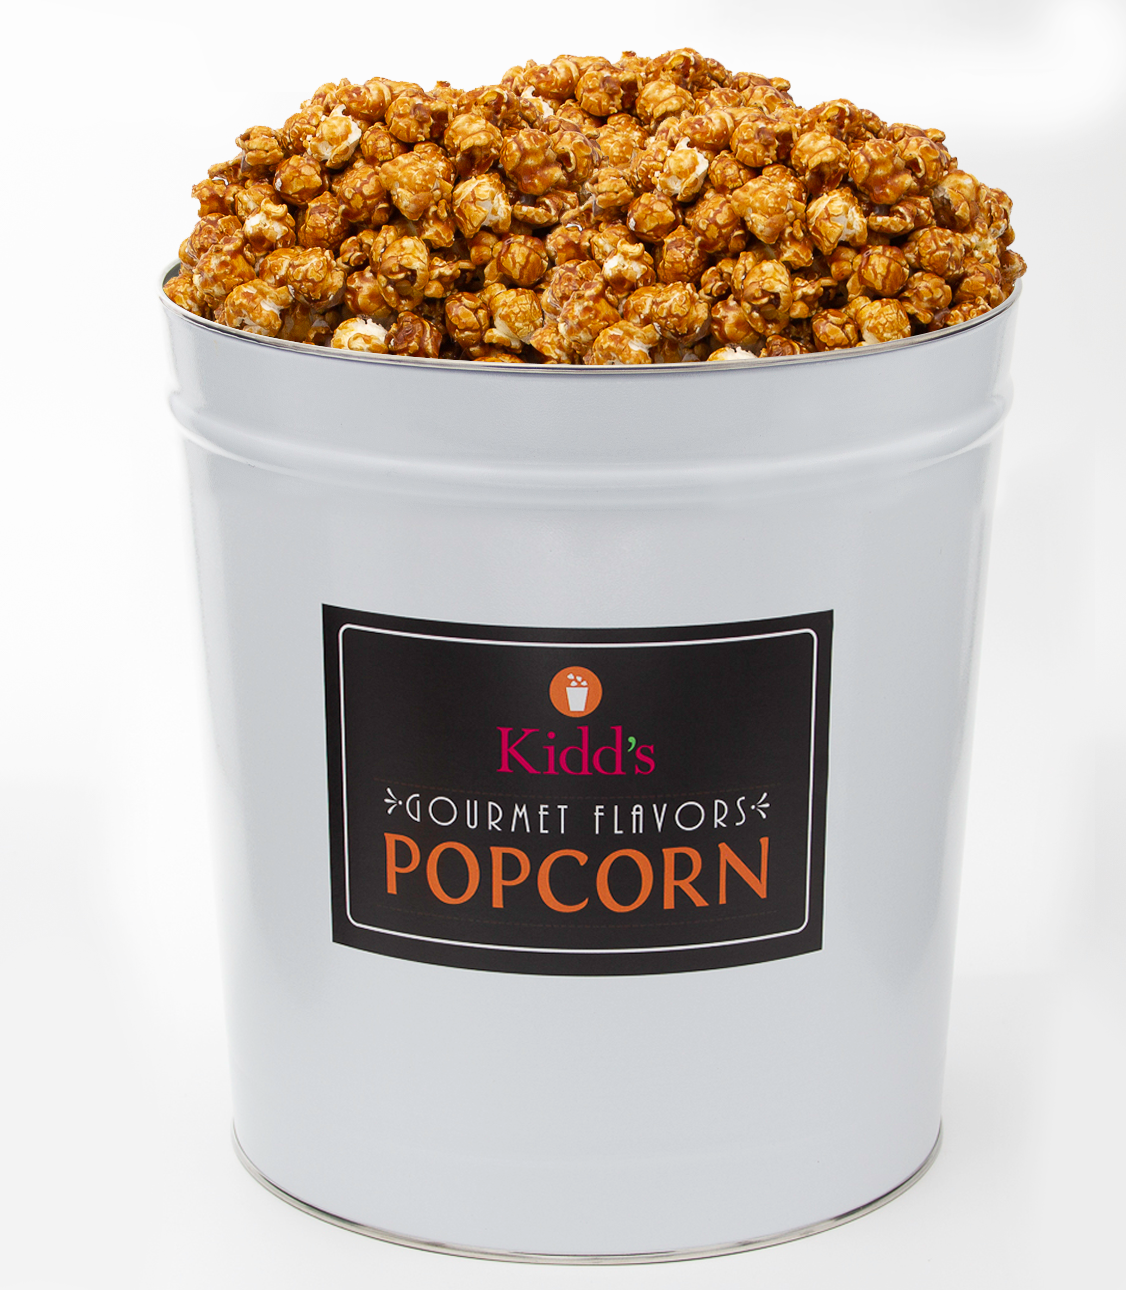 Tasty, specialty caramel popcorn. In large, 3.5 gallon resealable and reusable white with black label popcorn canister.